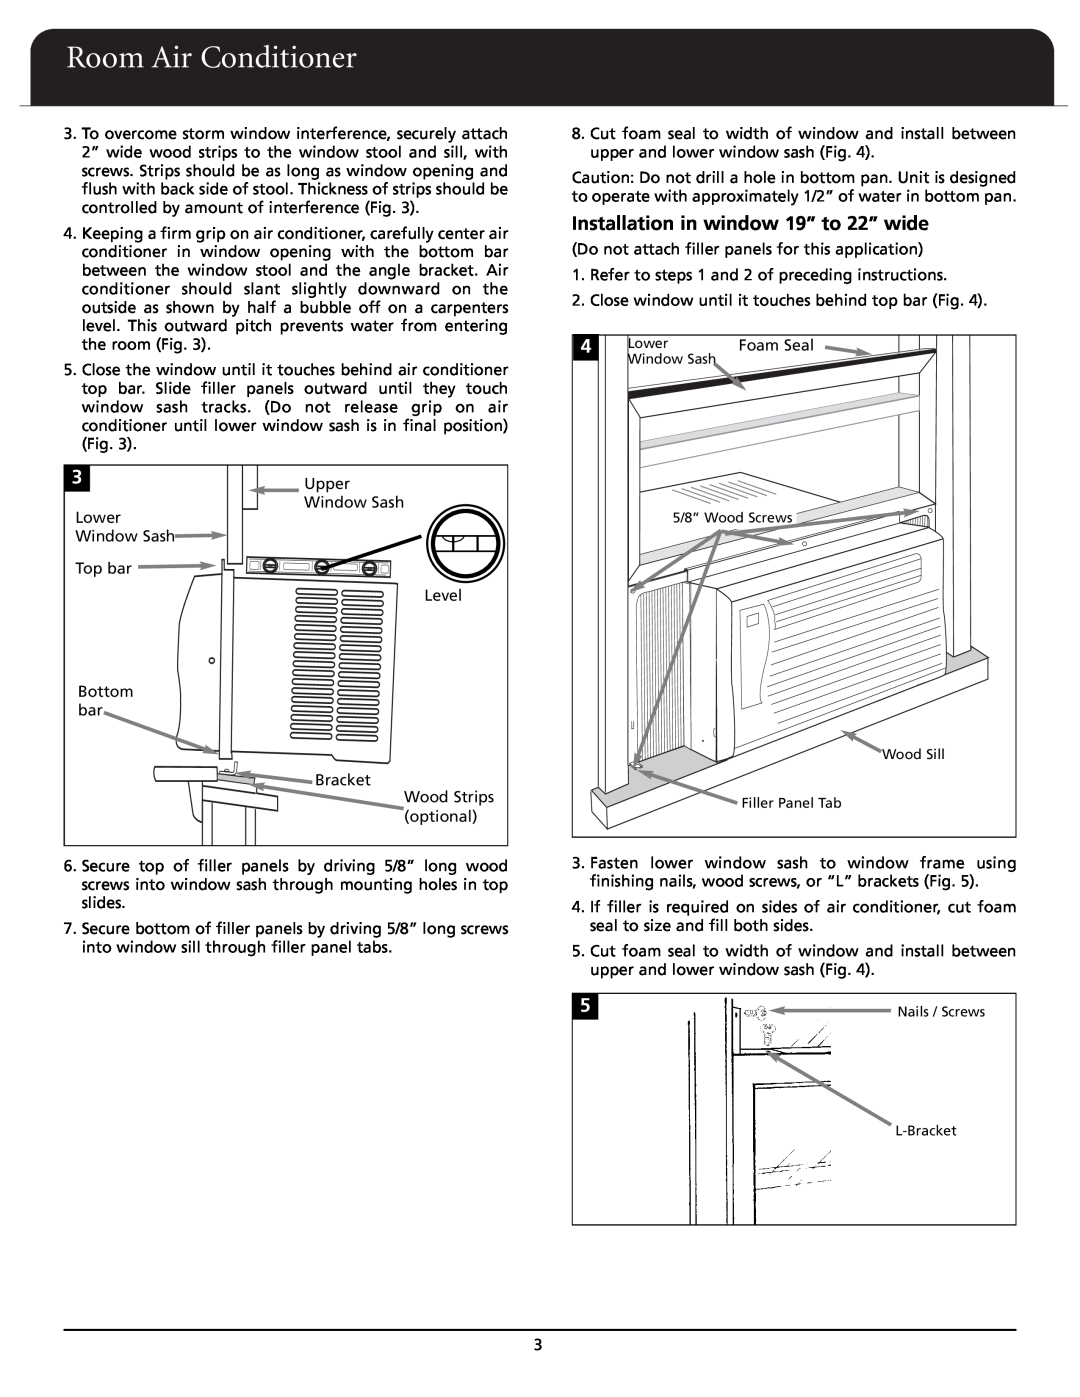 Fedders A6X05F2G important safety instructions Installation in window 19” to 22” wide, Room Air Conditioner 